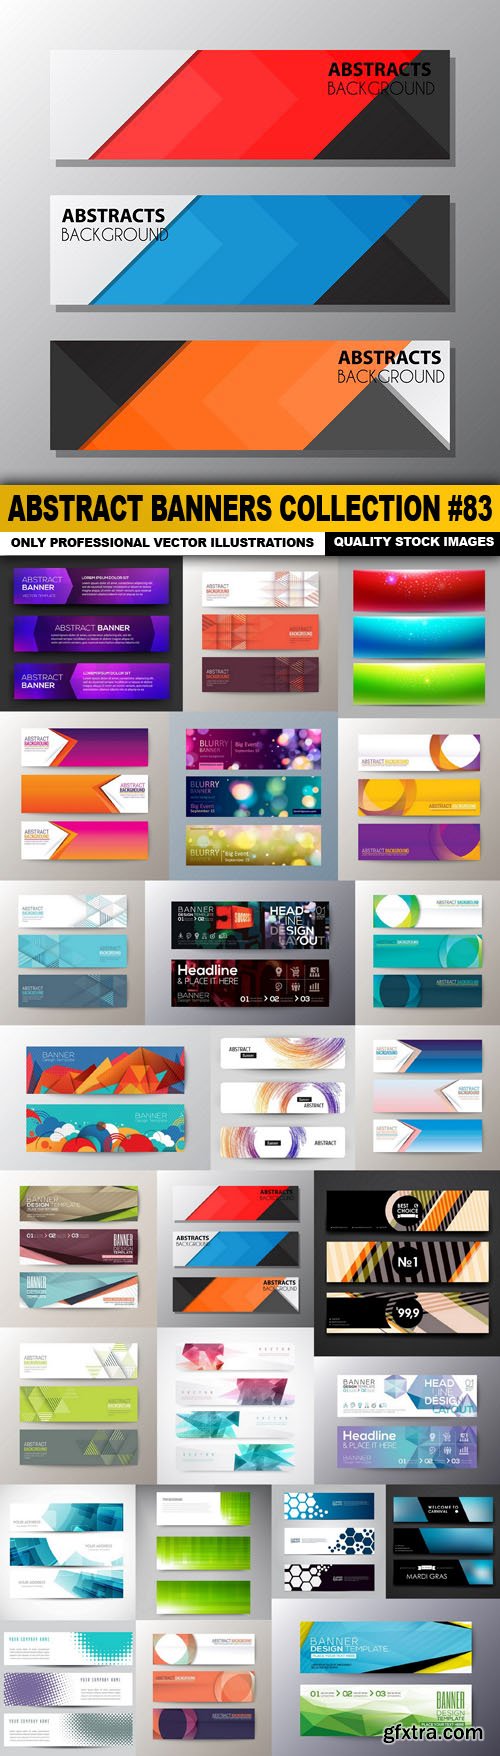 Abstract Banners Collection #83 - 25 Vectors